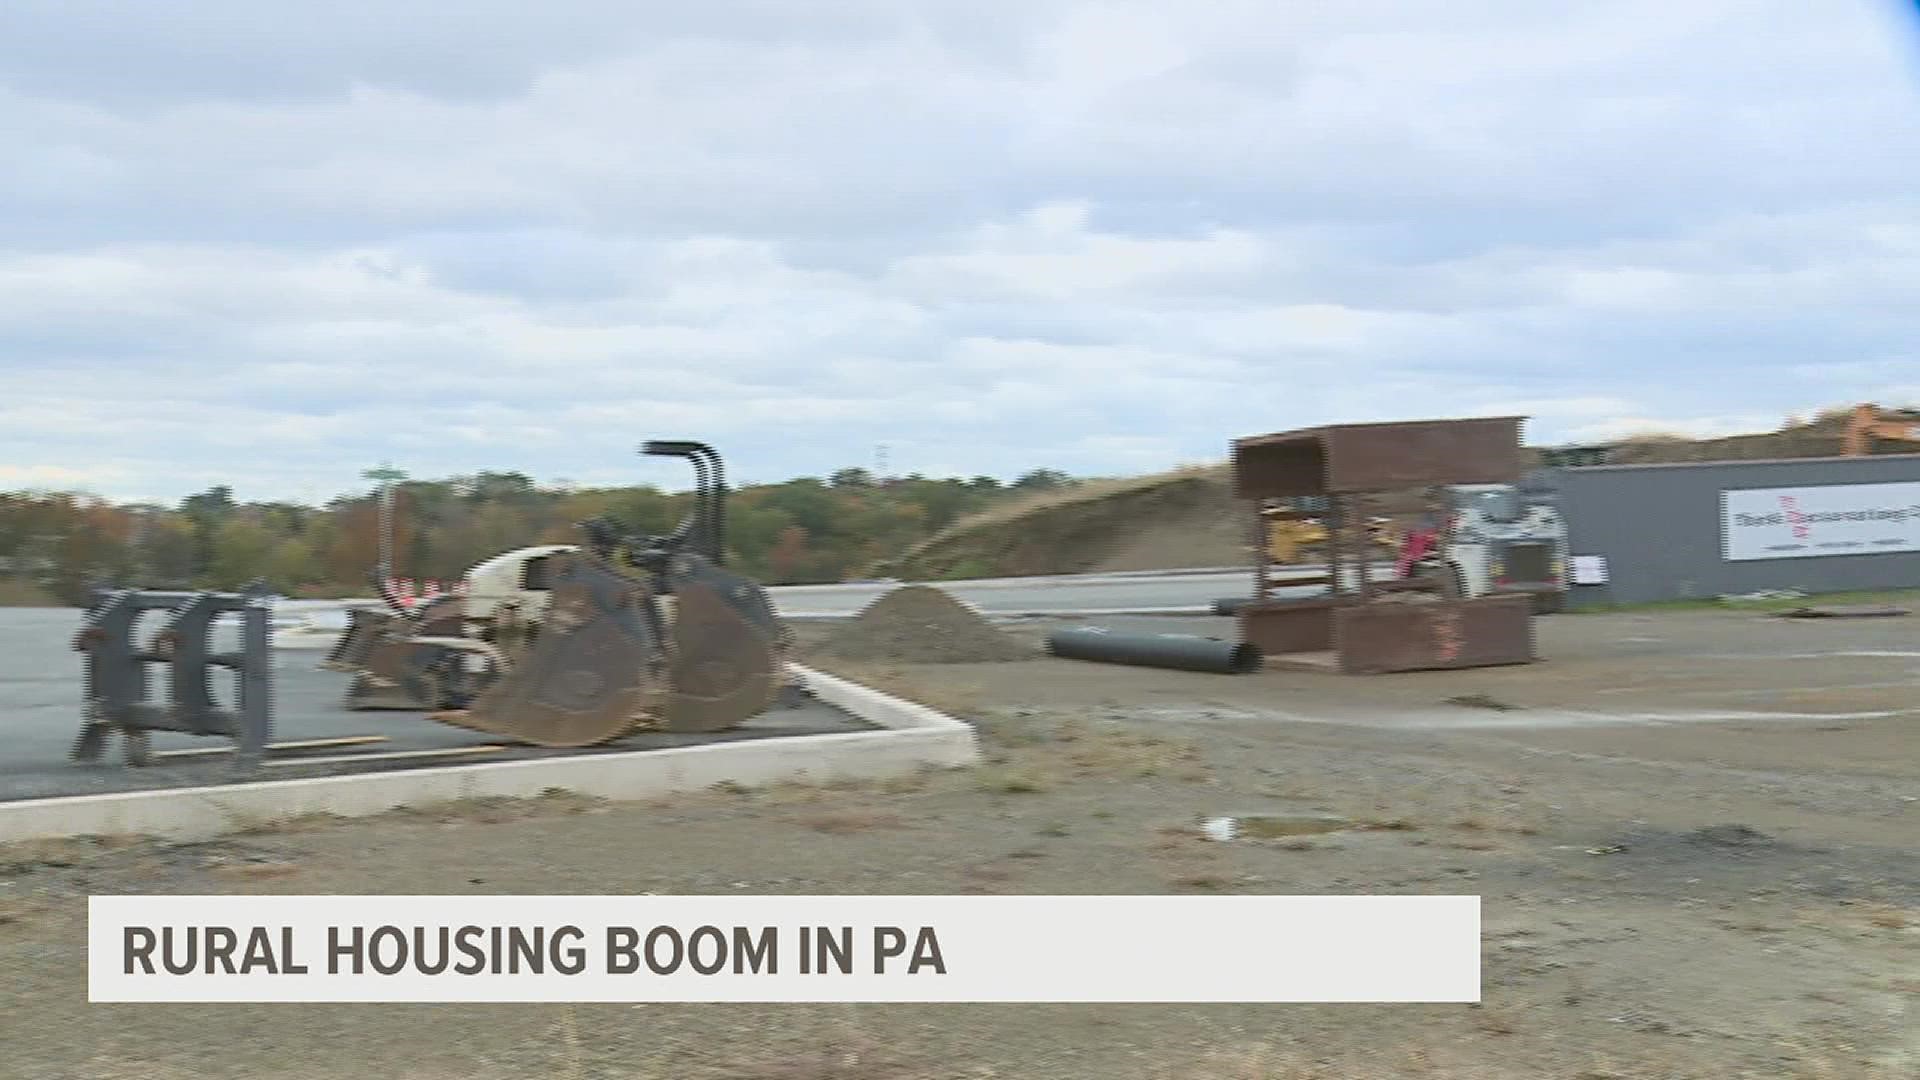 Parts of Pennsylvania are seeing a housing boom, according to an analysis by the Center for Rural Pennsylvania.